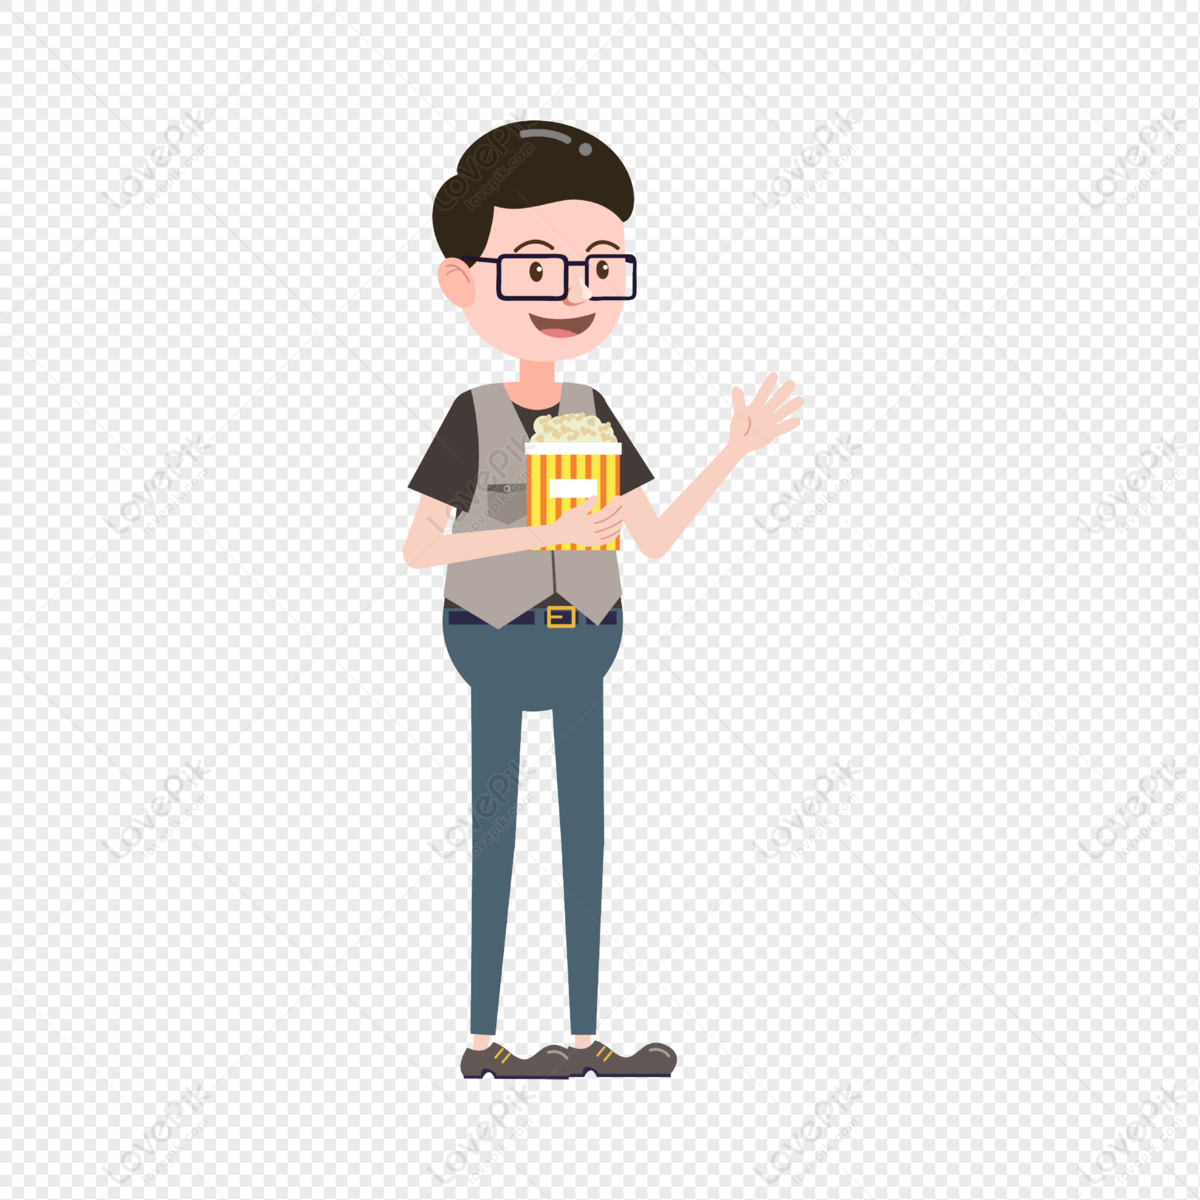 Boy Eating Popcorn PNG Image Free Download And Clipart Image For Free  Download - Lovepik | 401706511